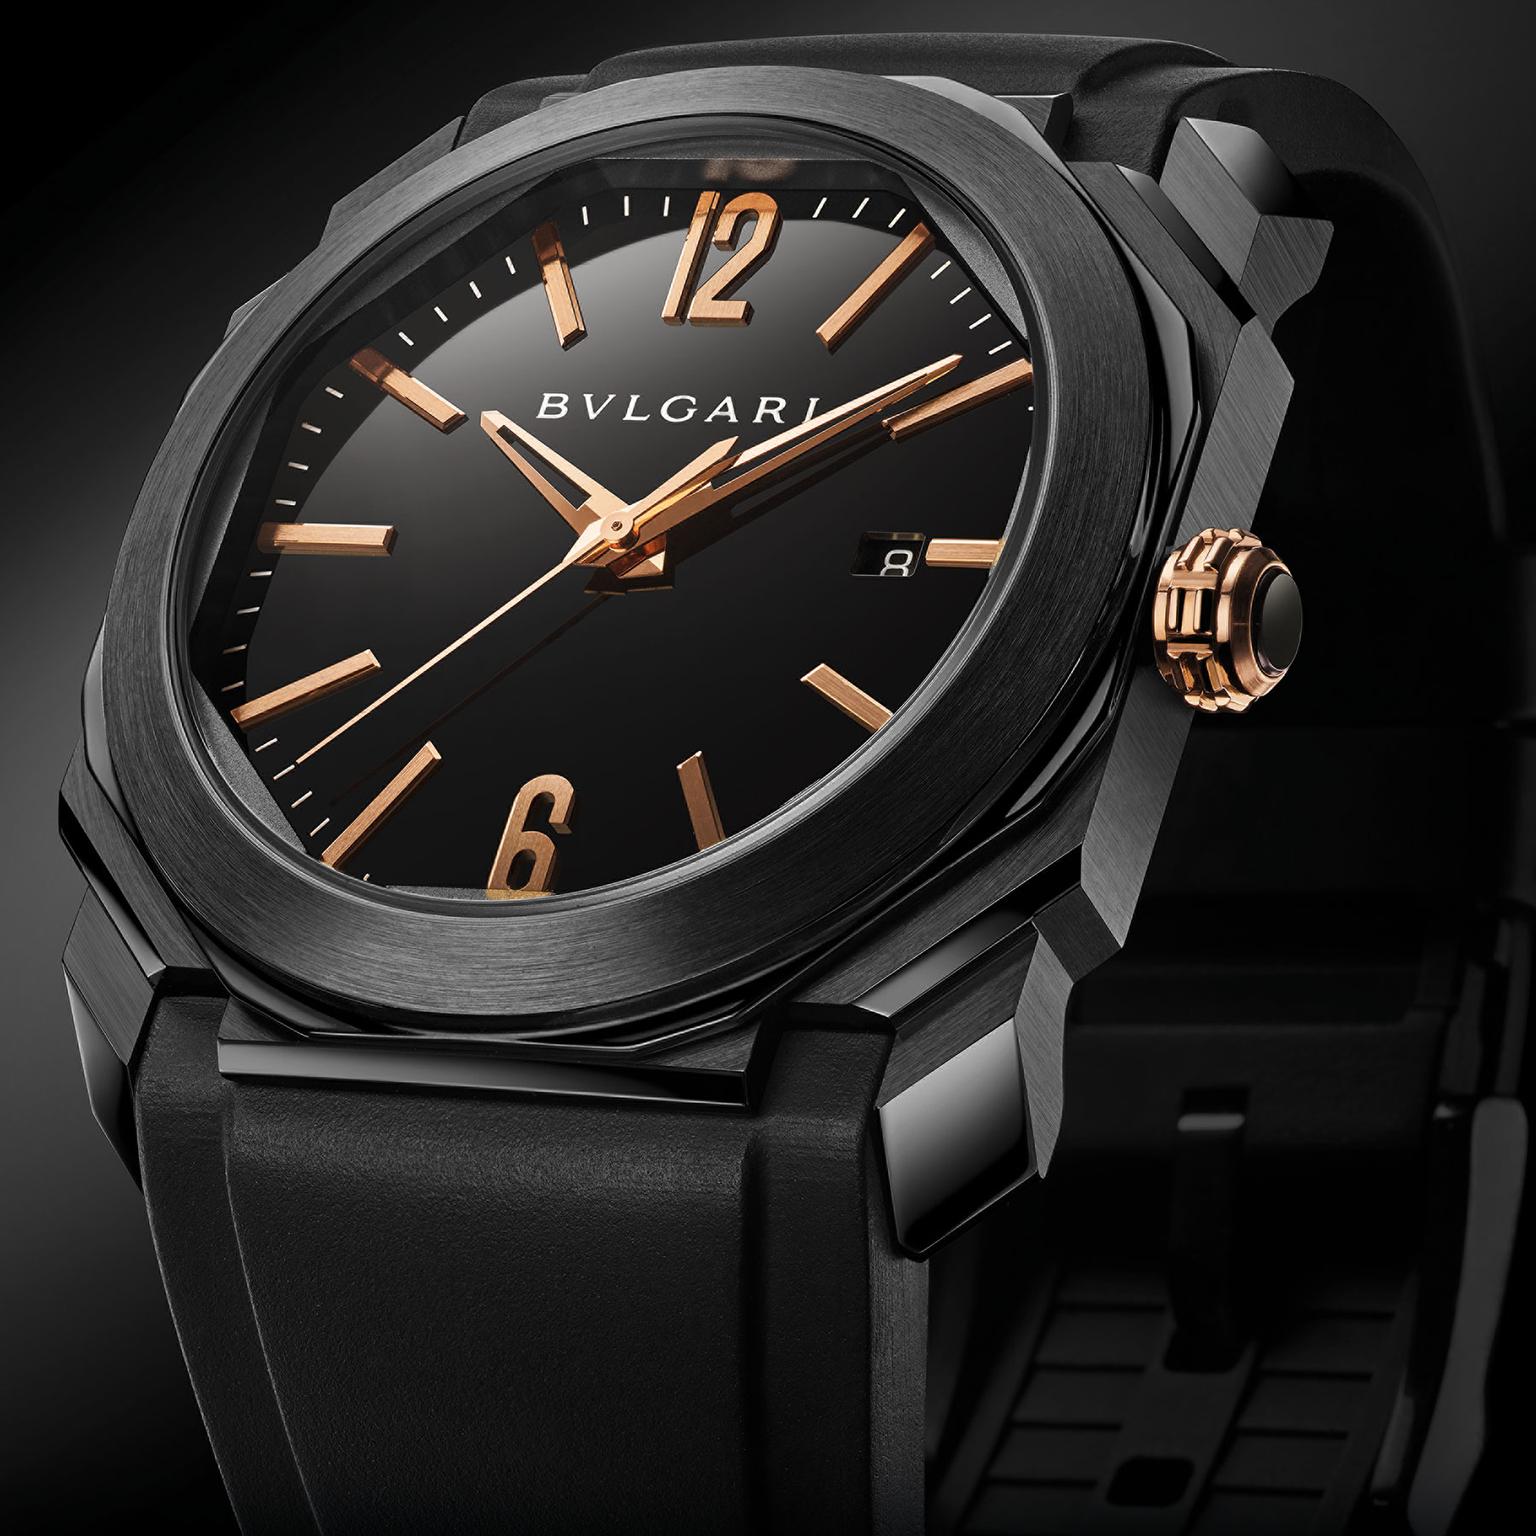 The All Black men's watches from Hublot and more | The Jewellery Editor